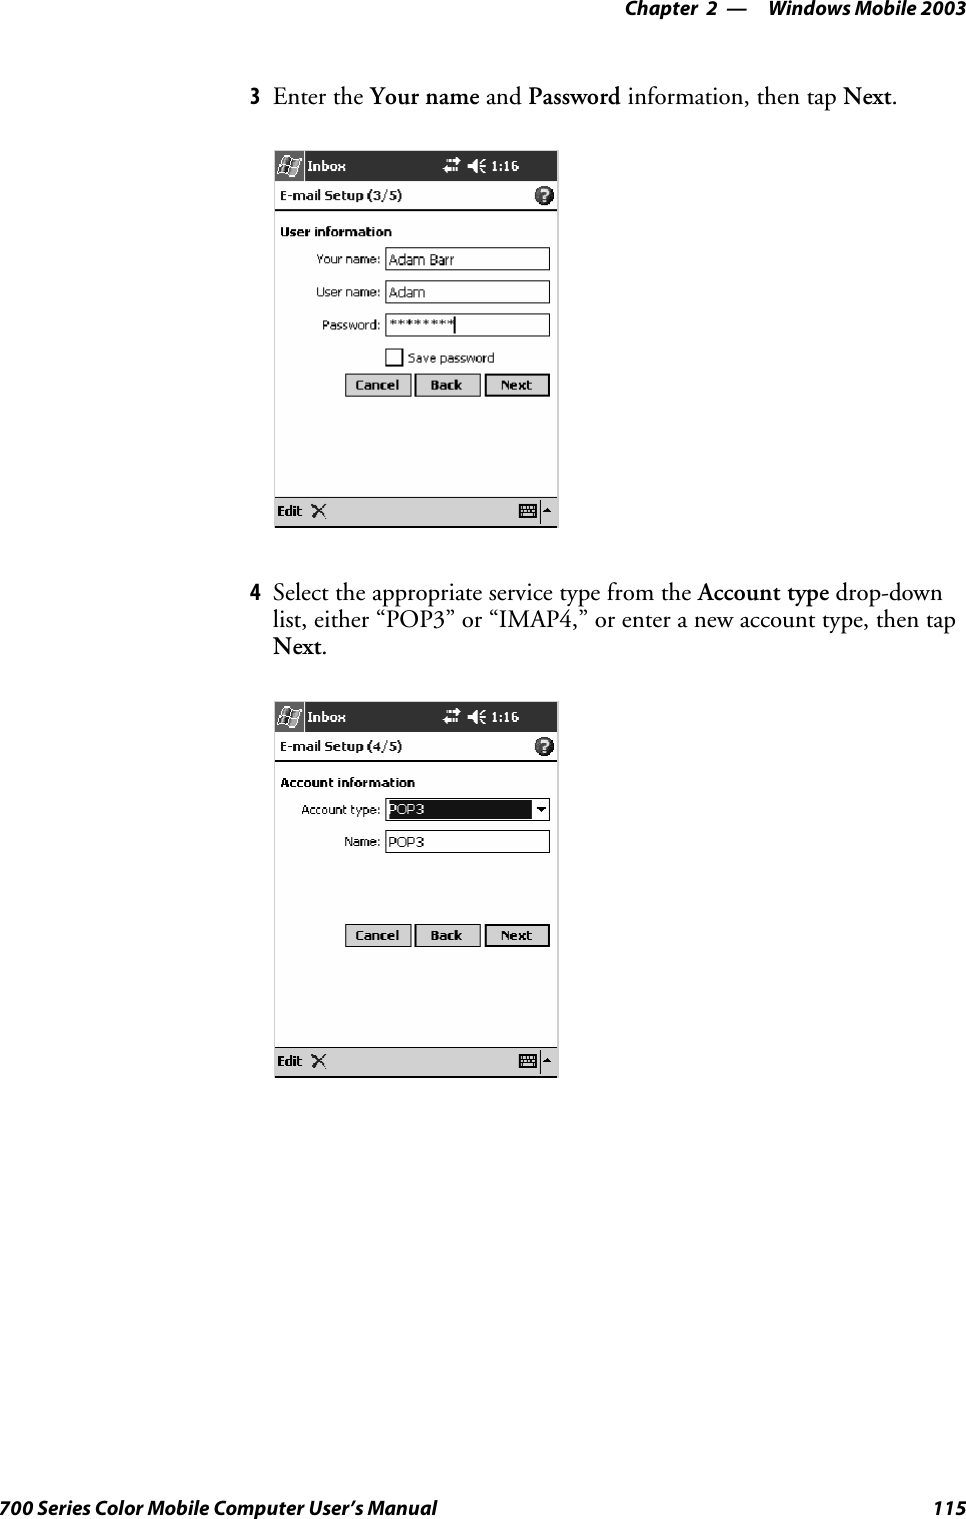 Windows Mobile 2003—Chapter 2115700 Series Color Mobile Computer User’s Manual3Enter the Your name and Password information, then tap Next.4Select the appropriate service type from the Account type drop-downlist, either “POP3” or “IMAP4,” or enter a new account type, then tapNext.